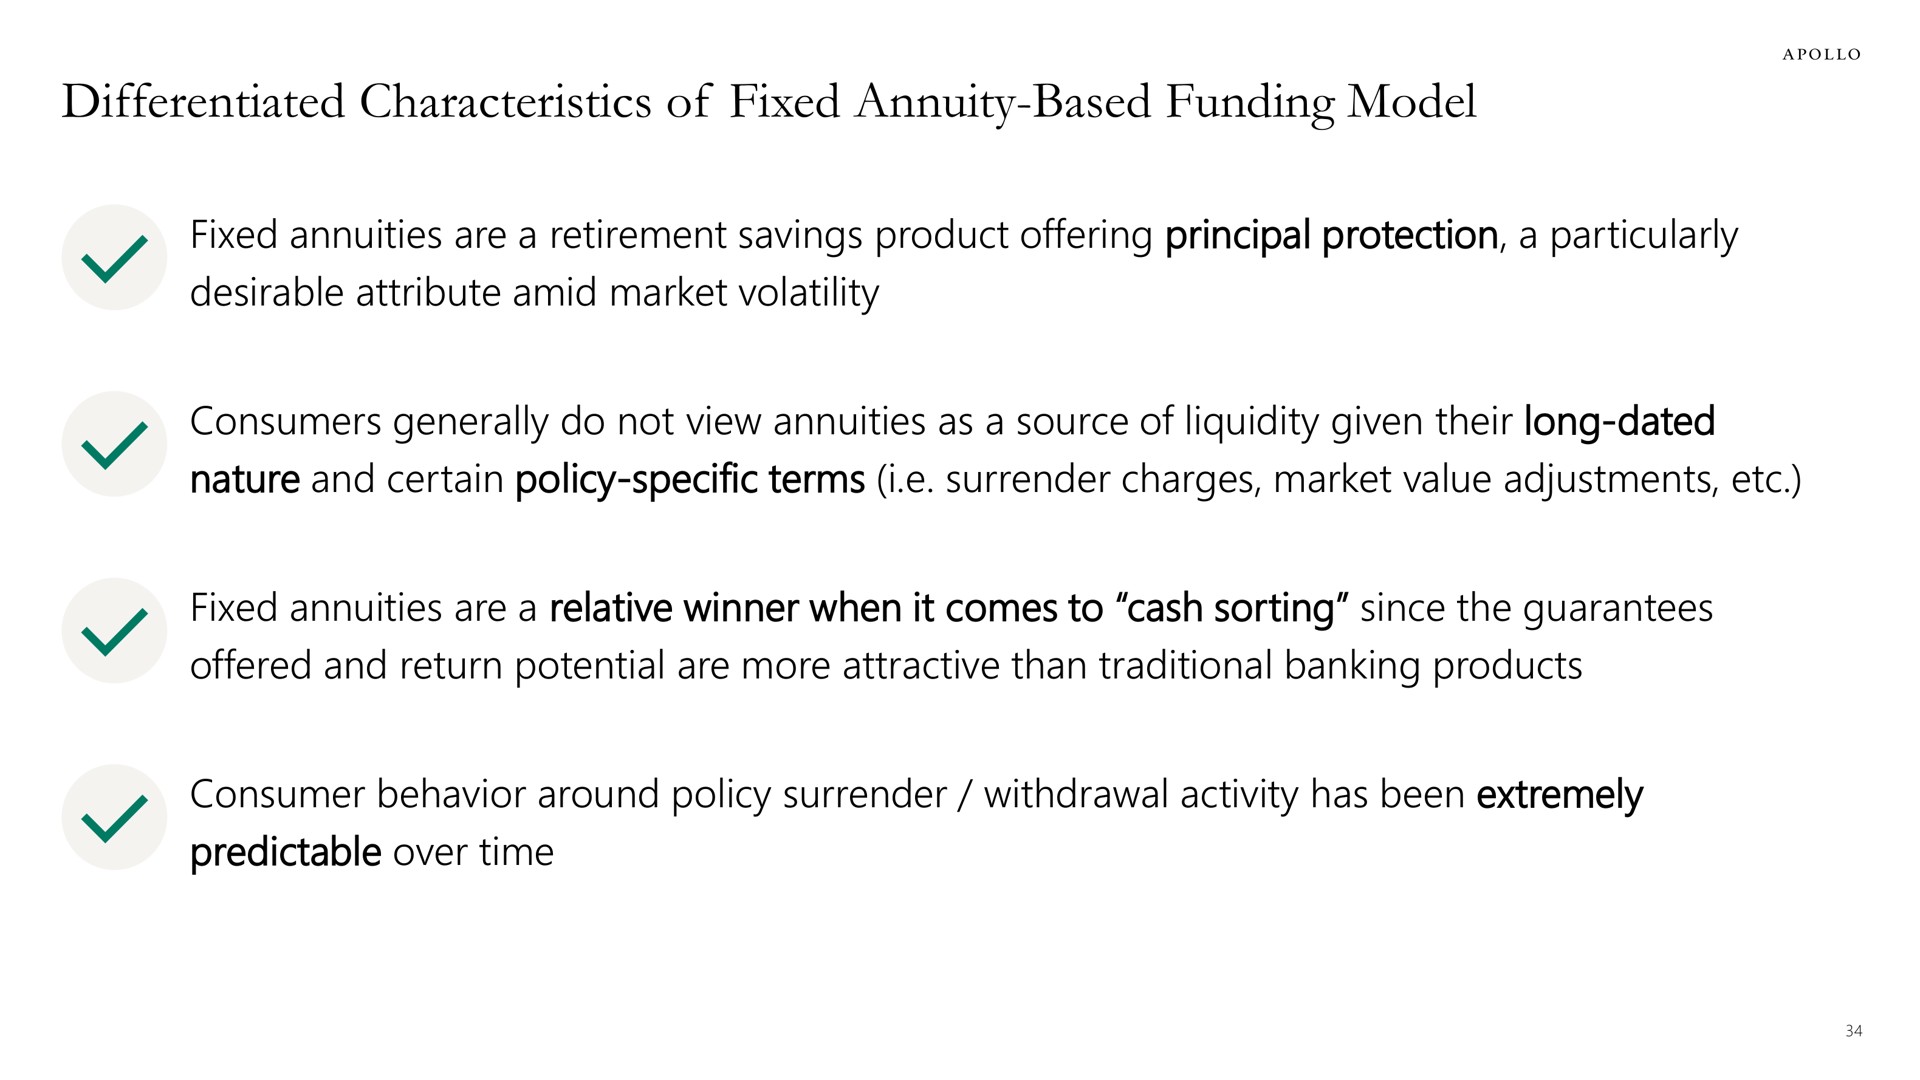 differentiated characteristics of fixed annuity based funding model annuities are a retirement savings product offering principal protection a particularly desirable attribute amid market volatility consumers generally do not view annuities as a source liquidity given their long dated nature and certain policy specific terms i surrender charges market value adjustments annuities are a relative winner when it comes to cash sorting since the guarantees offered and return potential are more attractive than traditional banking products consumer behavior around policy surrender withdrawal activity has been extremely predictable over time | Apollo Global Management